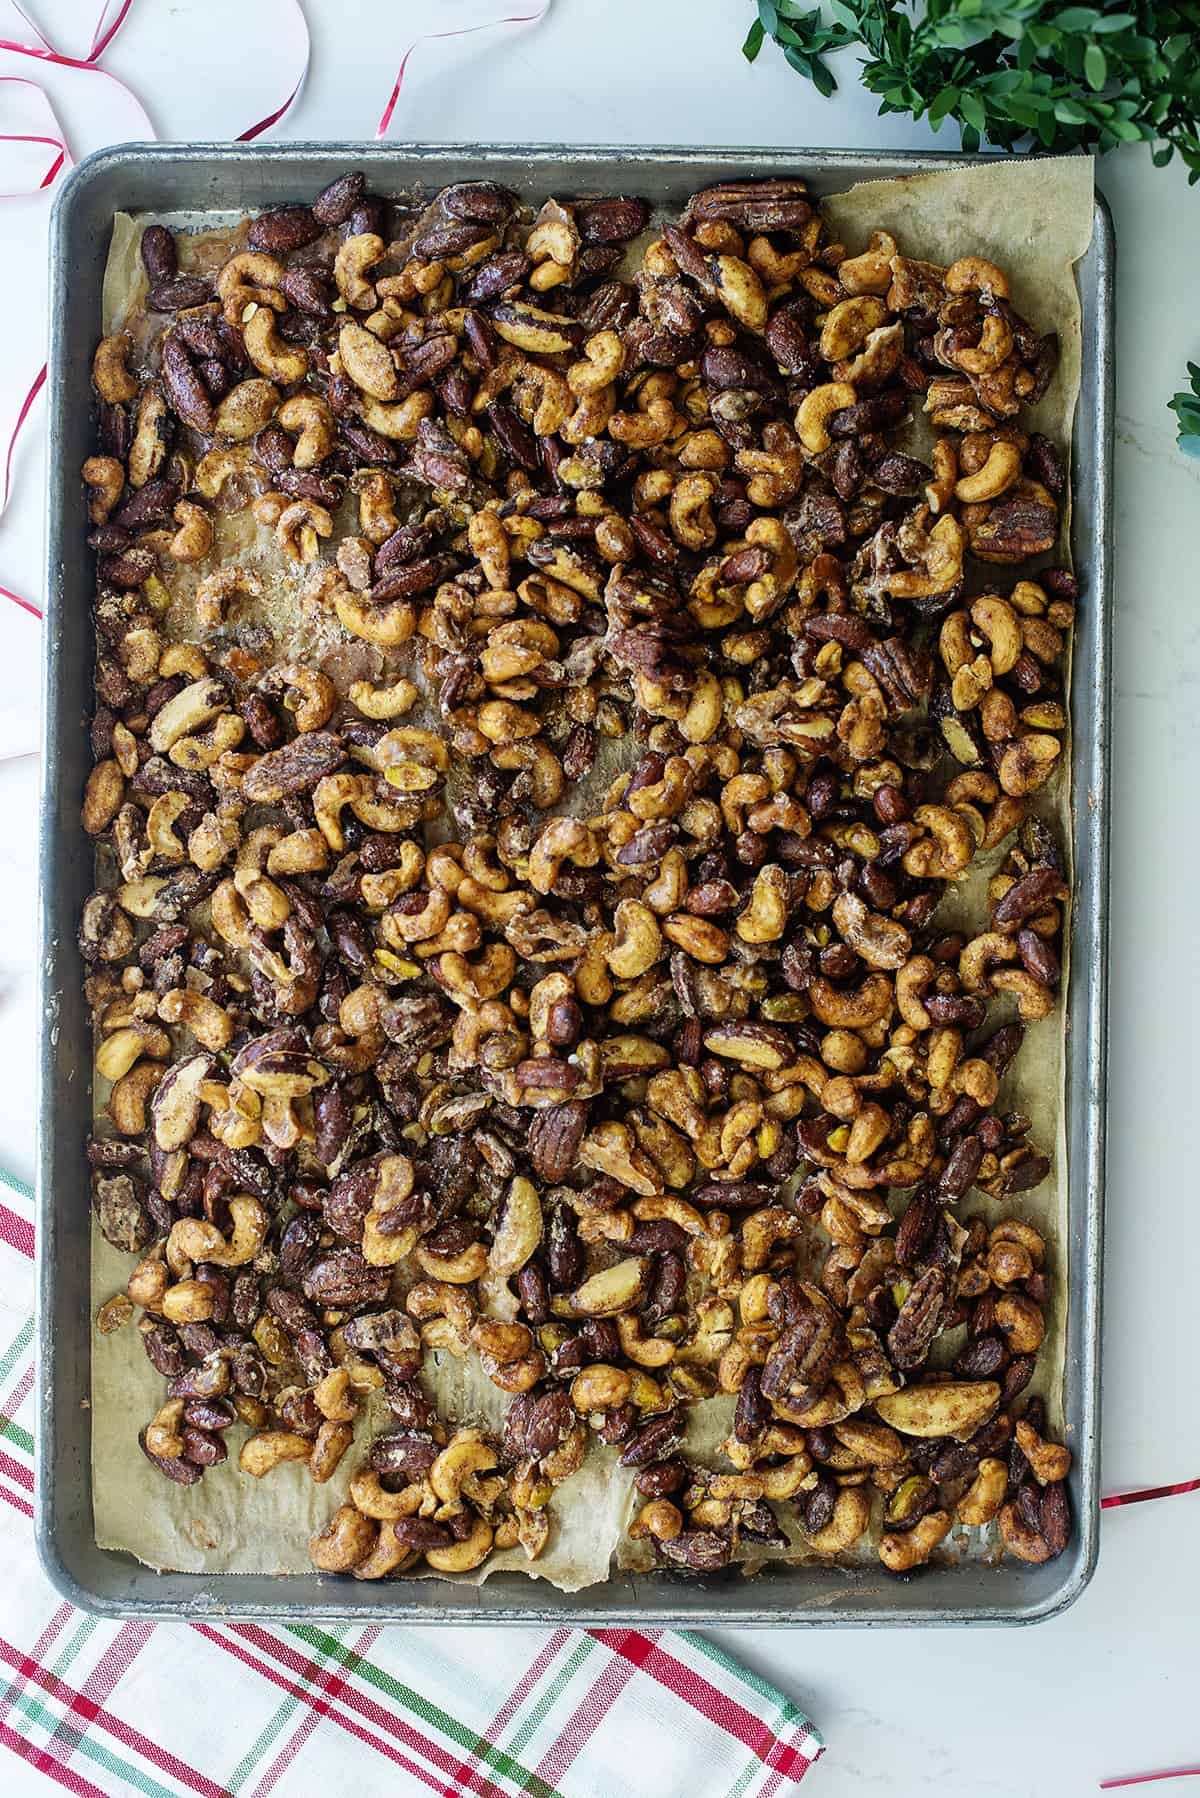 Candied nuts on bakign sheet.